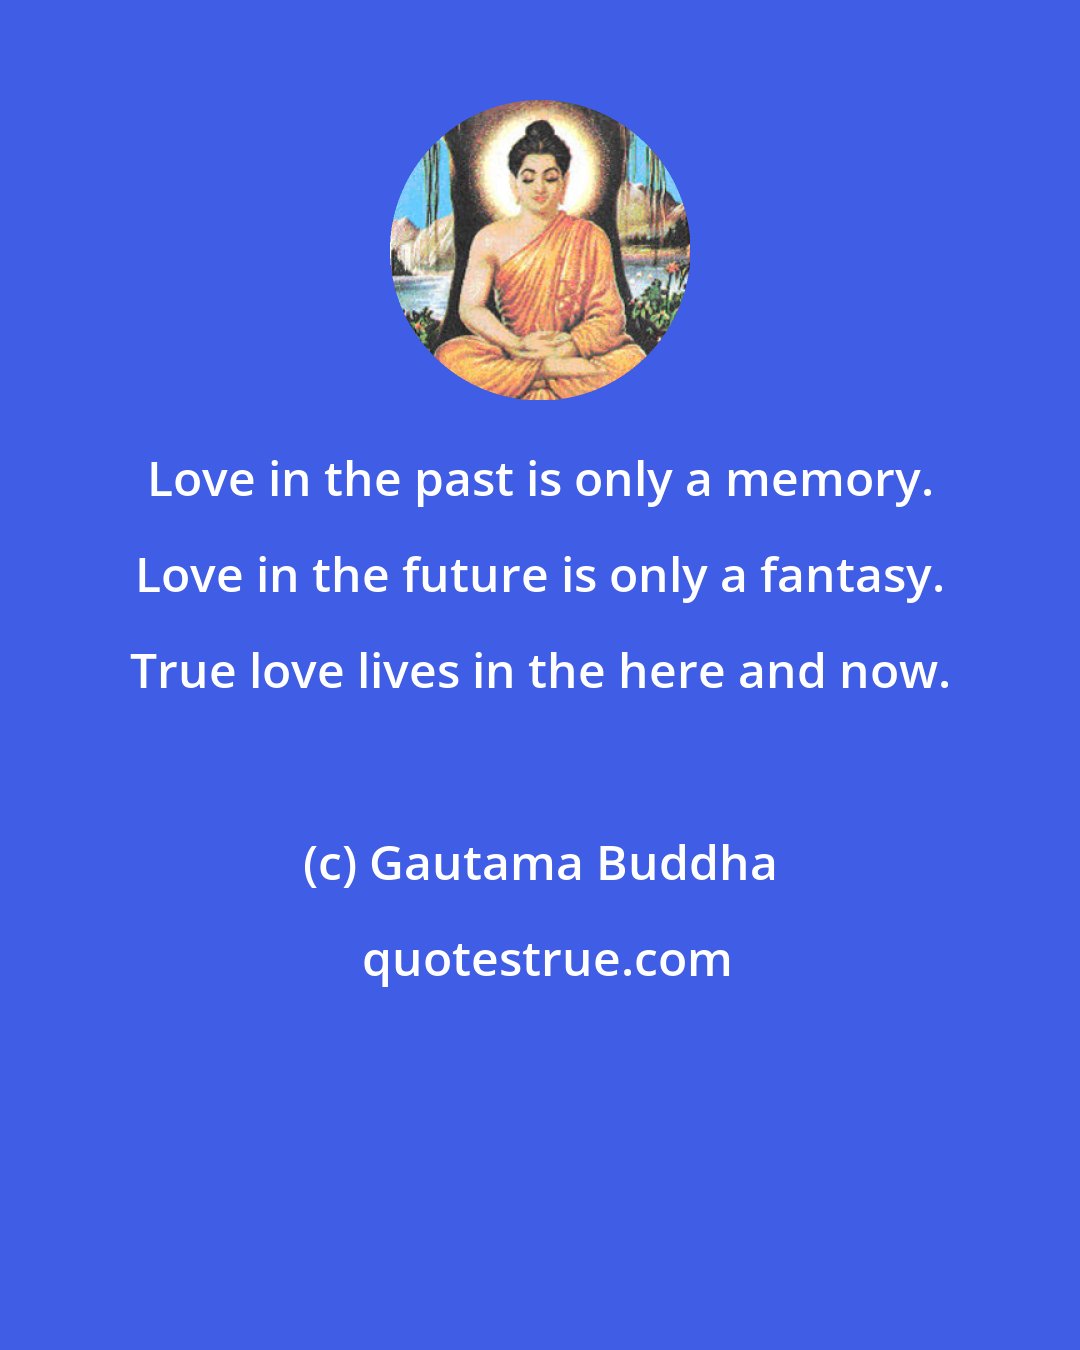 Gautama Buddha: Love in the past is only a memory. Love in the future is only a fantasy. True love lives in the here and now.